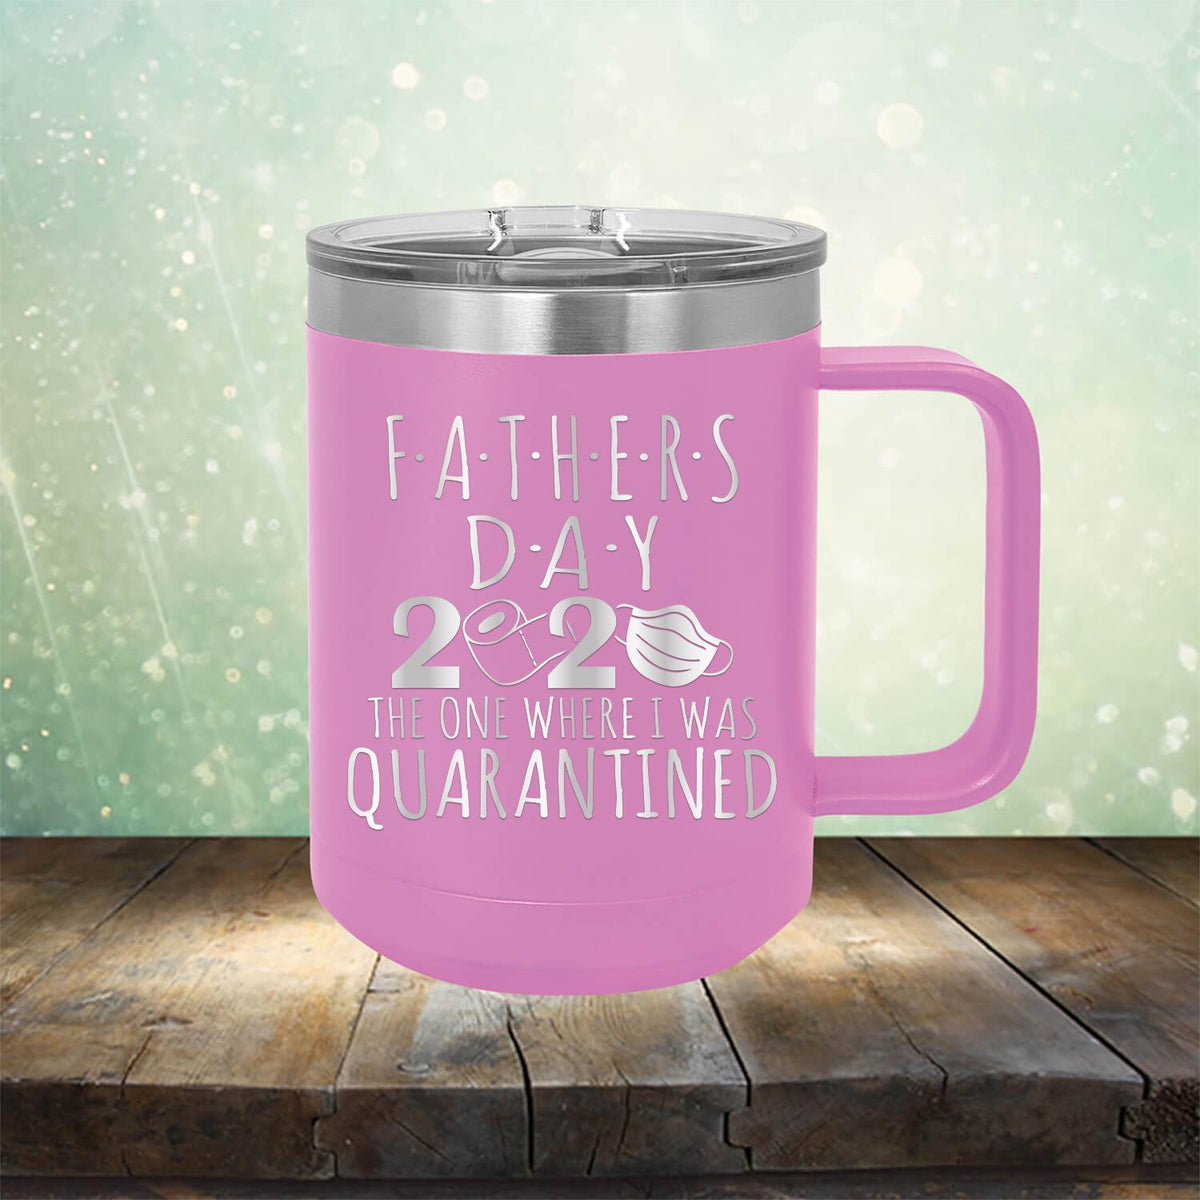 Fathers Day 2020 The One Where I Was Quarantined - Laser Etched Tumbler Mug